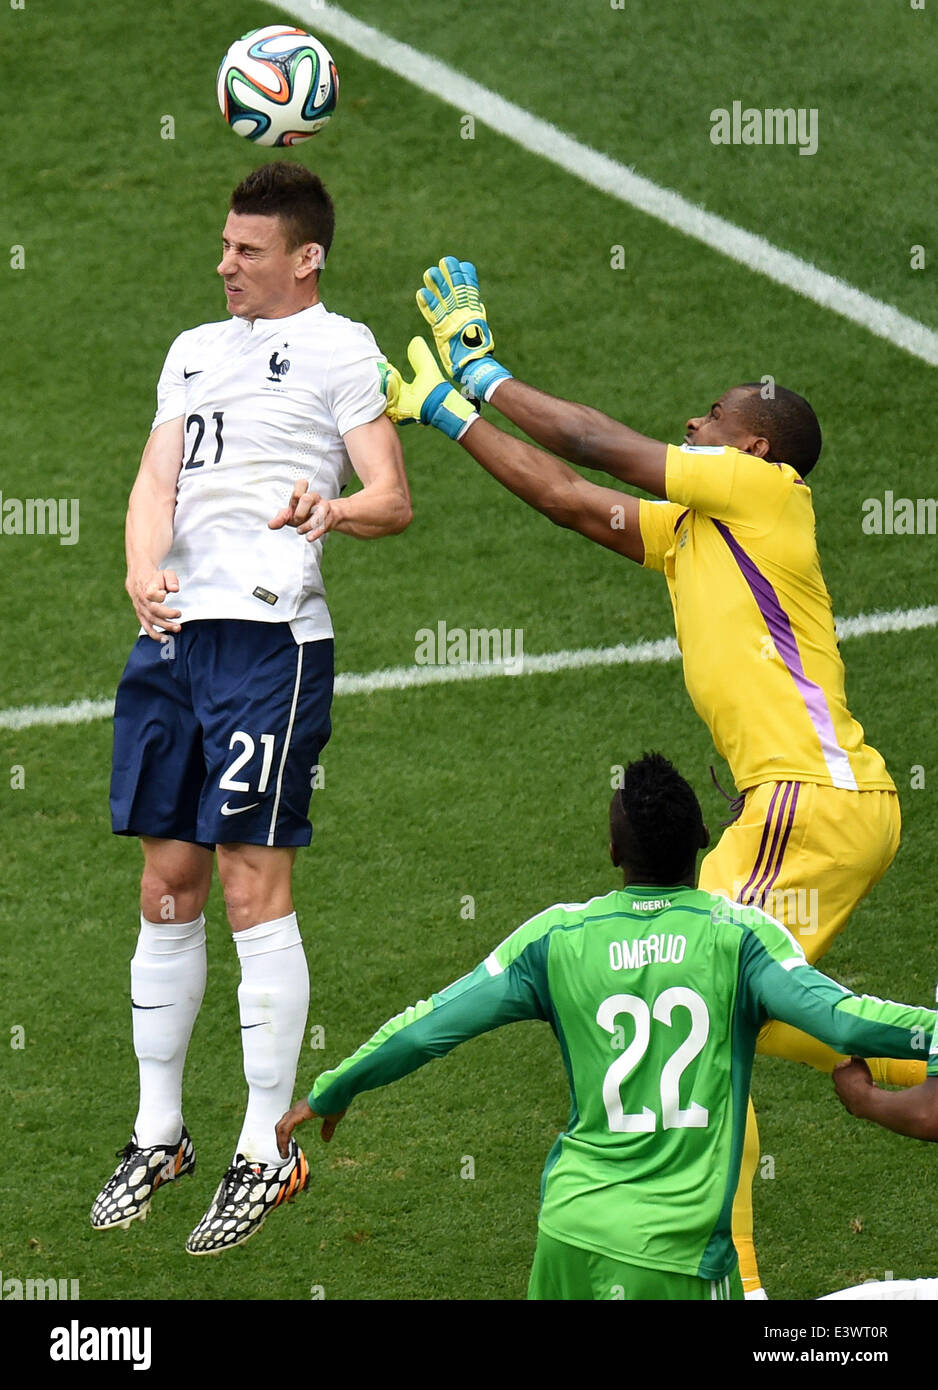 Brasilia, Brazil. 30th June, 2014. Nigeria's goalkeeper Vincent Enyeama blocks the ball during a Round of 16 match between France and Nigeria of 2014 FIFA World Cup at the Estadio Nacional Stadium in Brasilia, Brazil, on June 30, 2014. Credit:  Xinhua/Alamy Live News Stock Photo